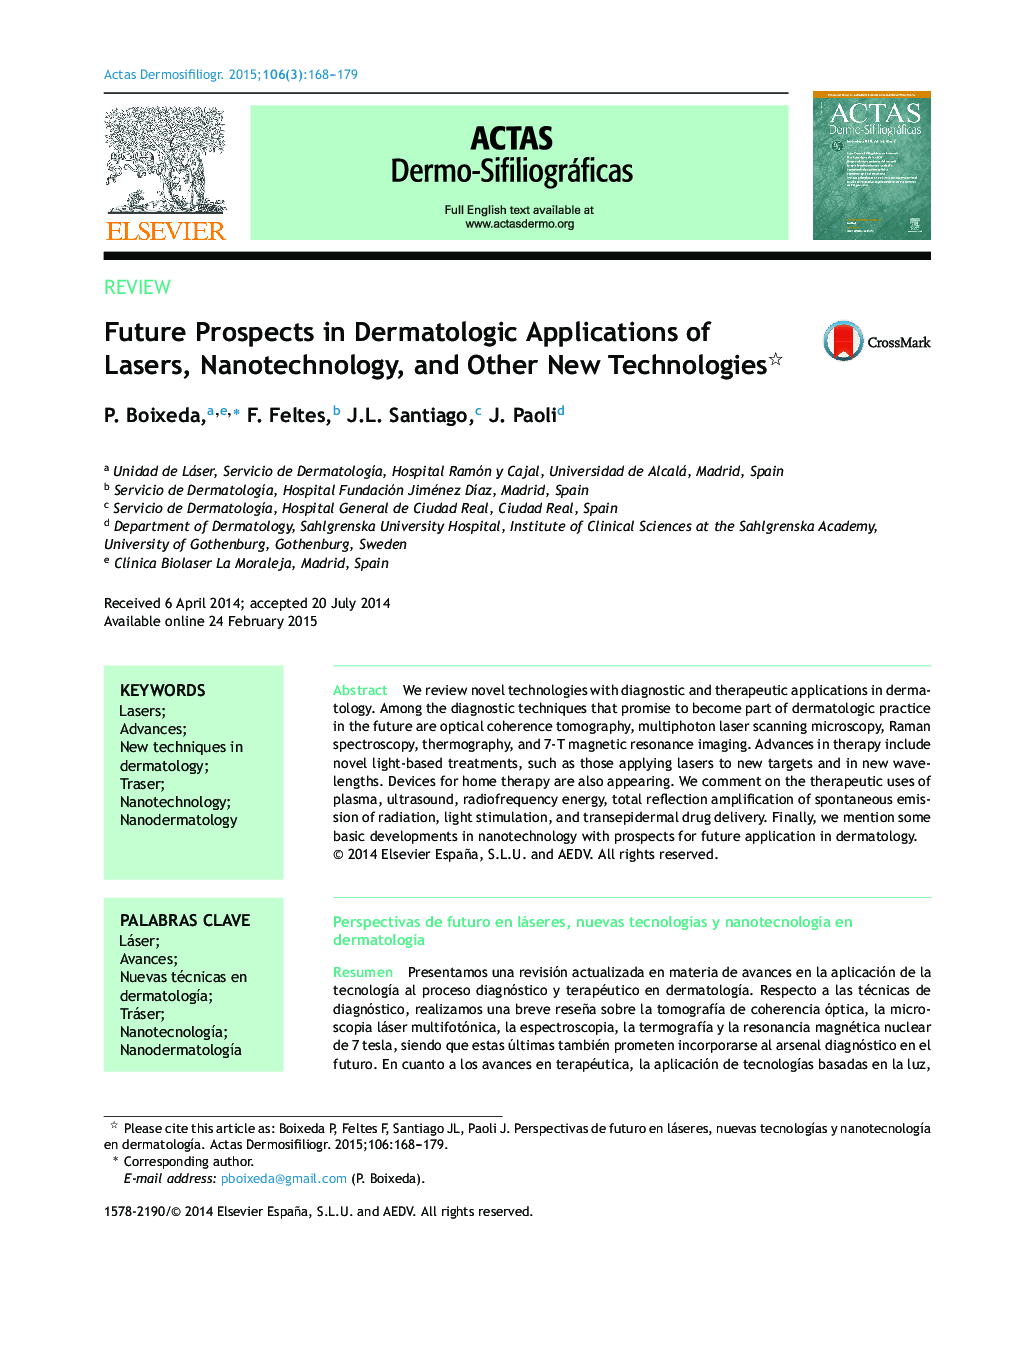 Future Prospects in Dermatologic Applications of Lasers, Nanotechnology, and Other New Technologies 